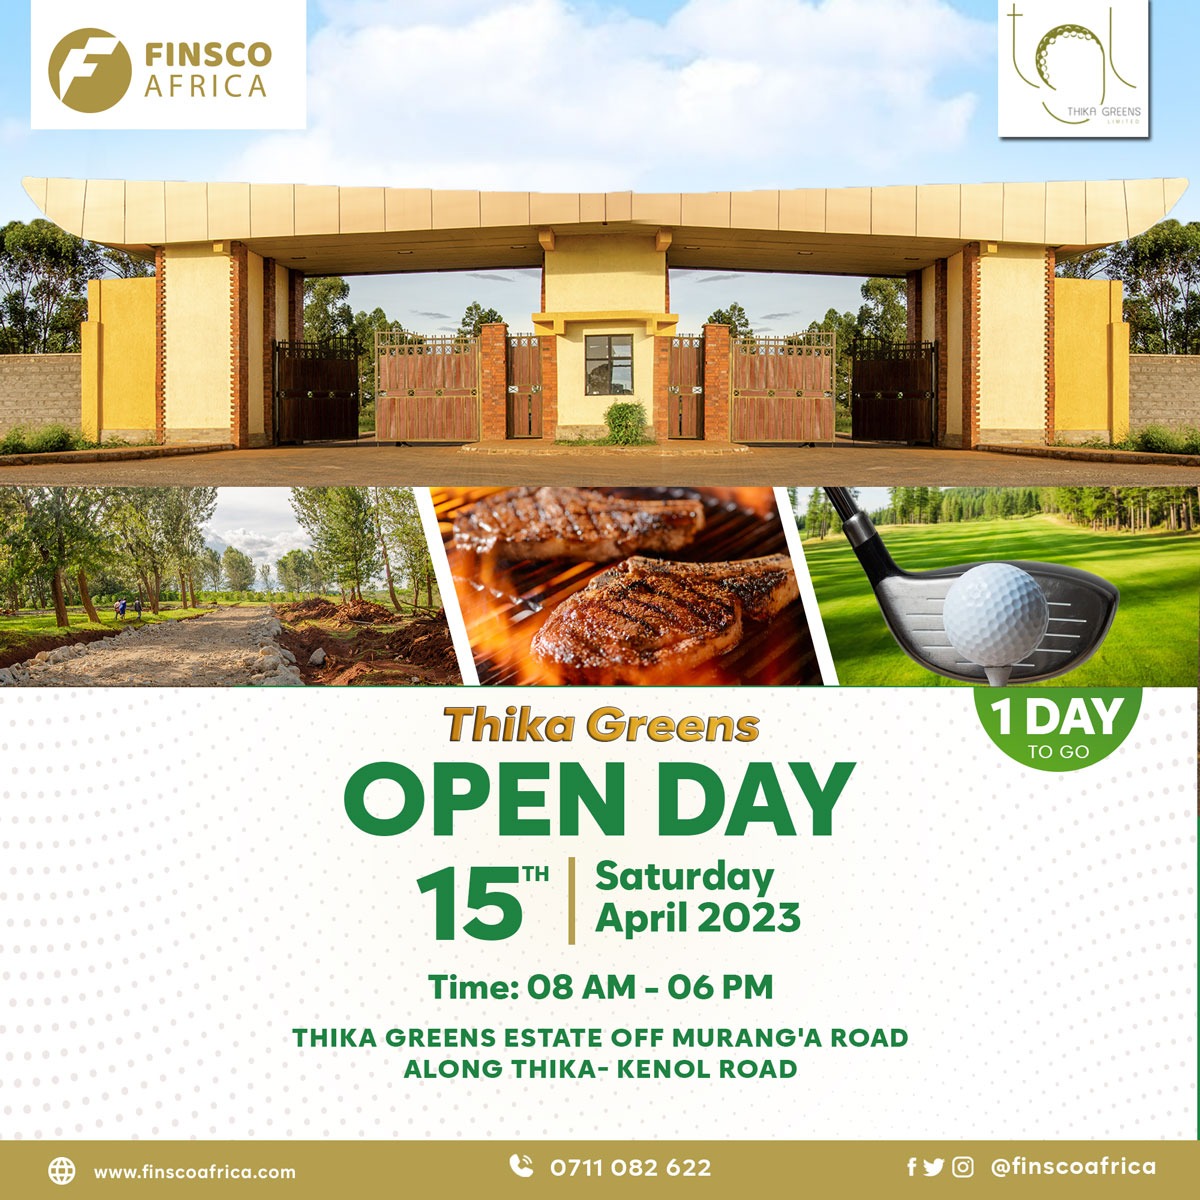 Join us this Saturday for an Open Day at Thika Greens and explore what could be your new residence.
Enjoy early bird prices on fully serviced residential plots from only KES 6.7M

☎️ 0711 082 622 
Send us an email on: sales@finscoafrica.com
#finscoafrica
#Thikagreens